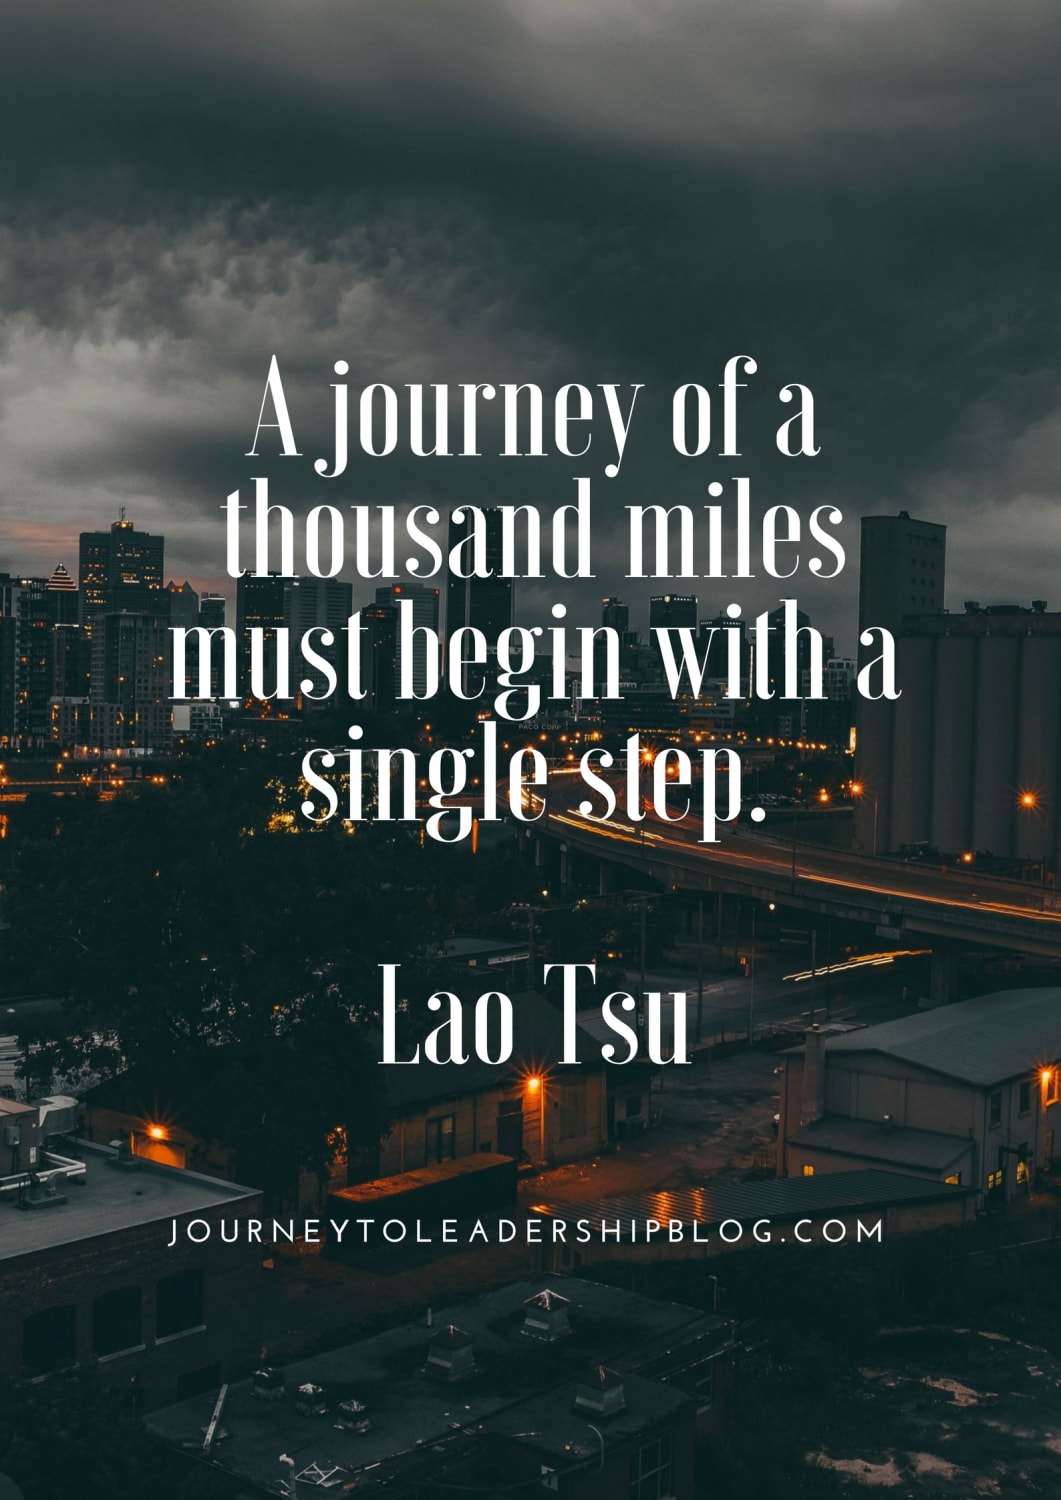 Quote Of The Week #45 - Journey To Leadership